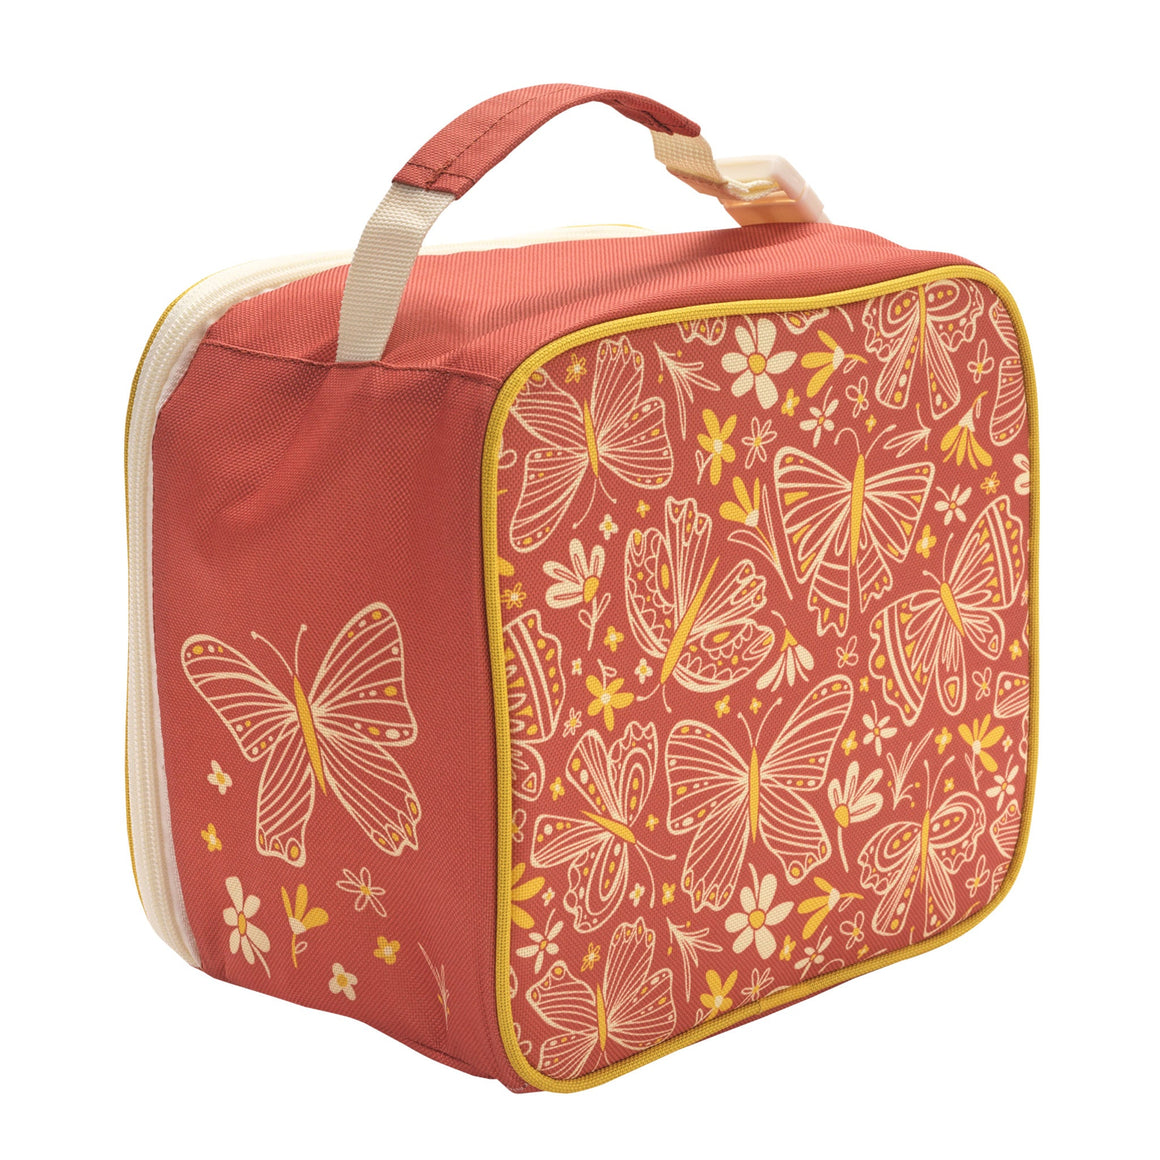 Boho Butterfly - Super Zippee Lunch Tote